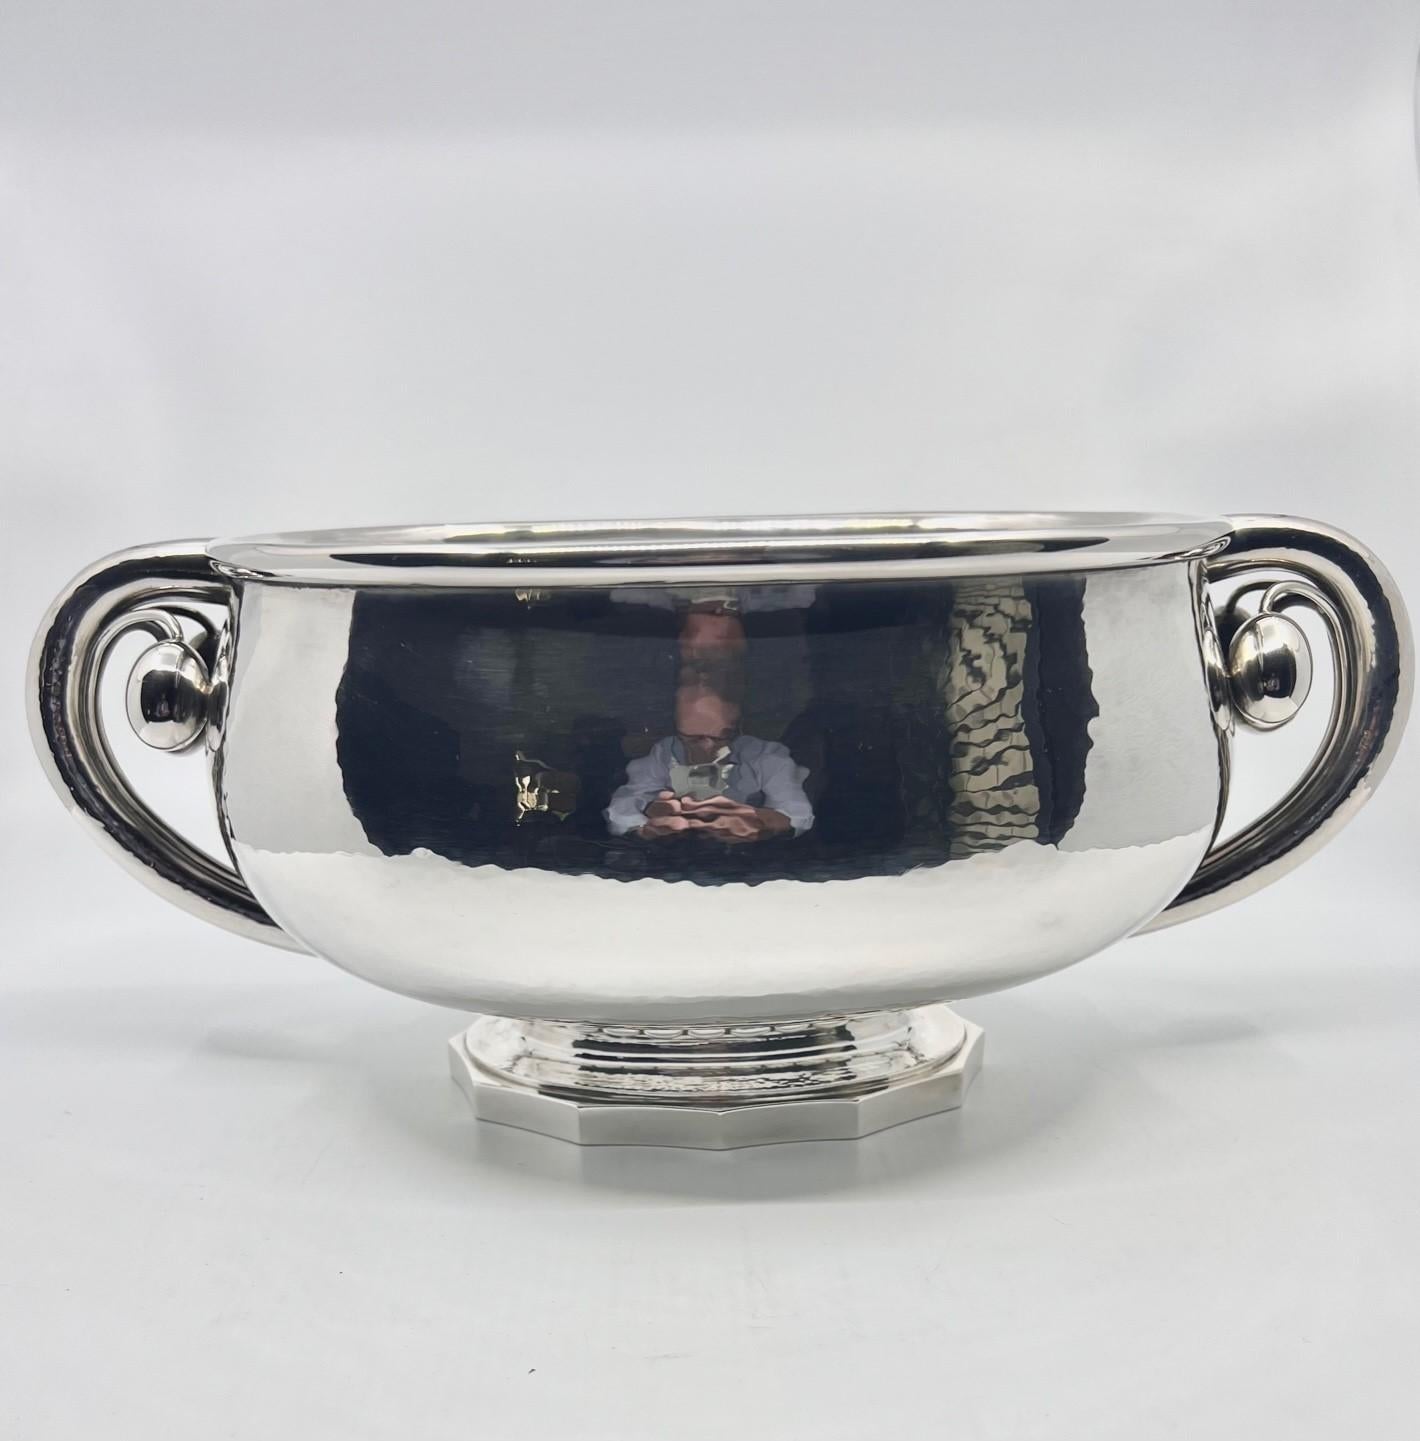 Georg Jensen Large Sterling Silver Centerpiece Bowl 501 In Excellent Condition For Sale In Hellerup, DK